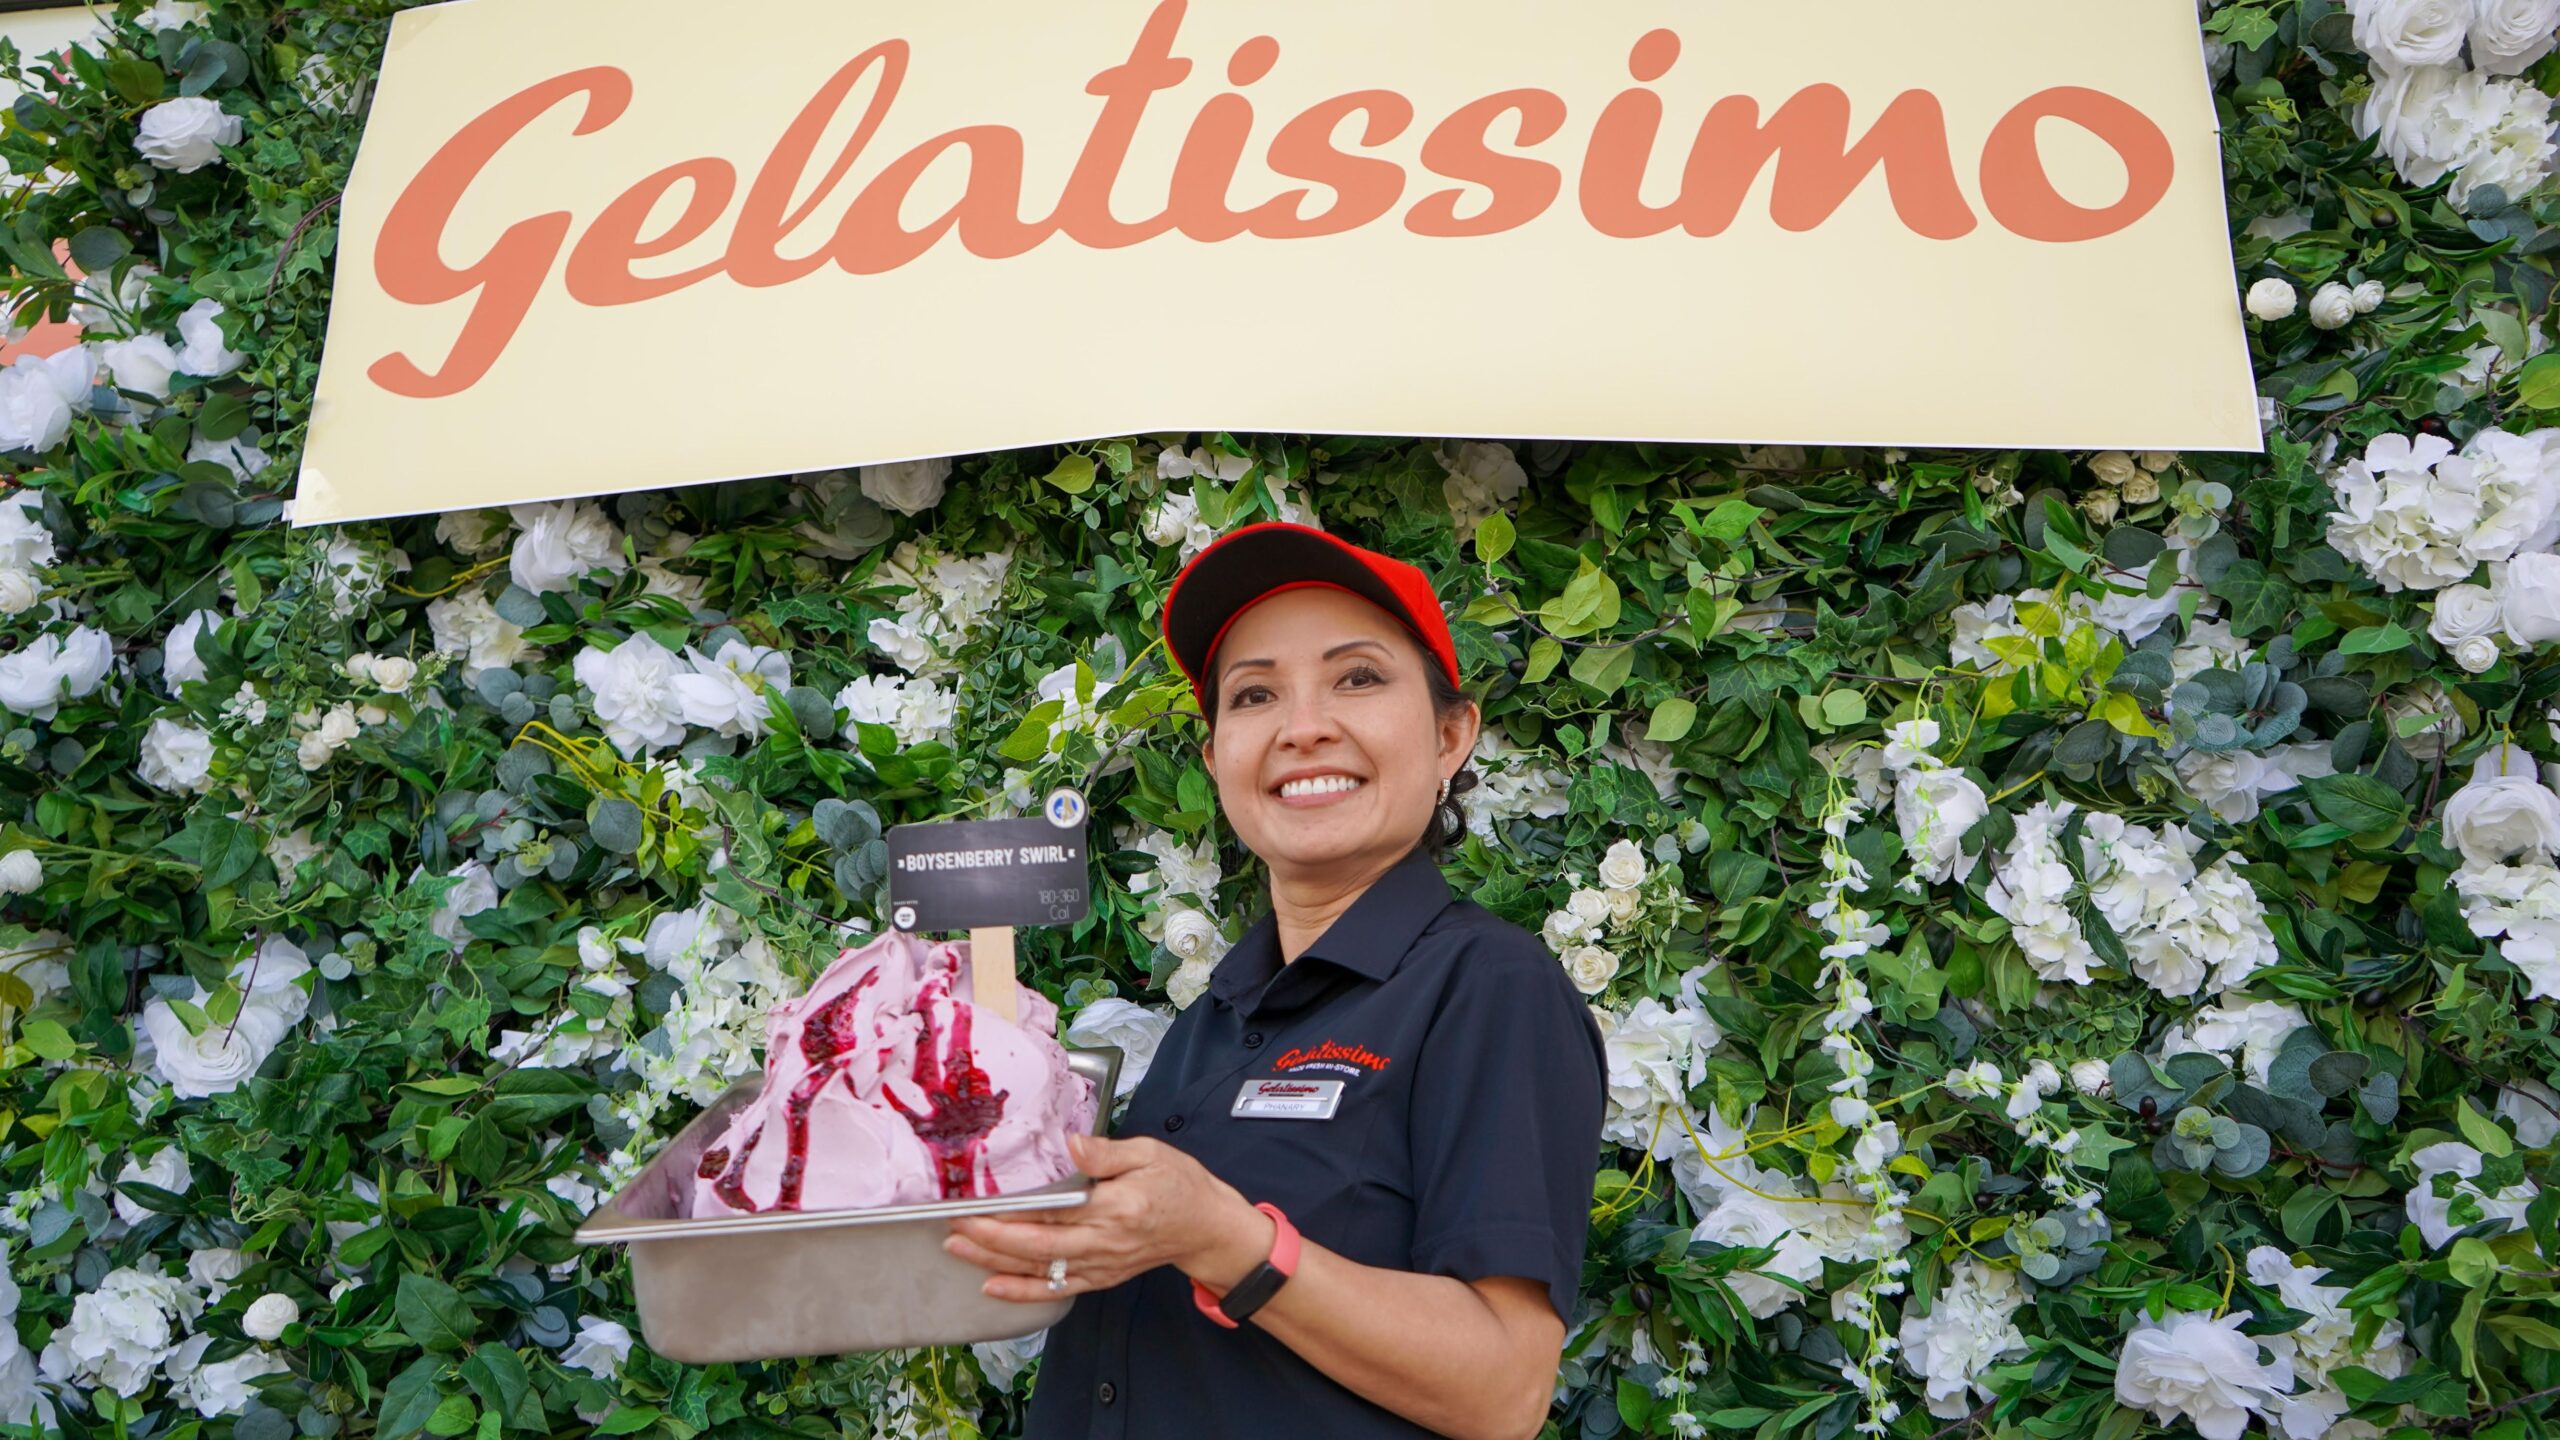 Gelatissimo's first US store